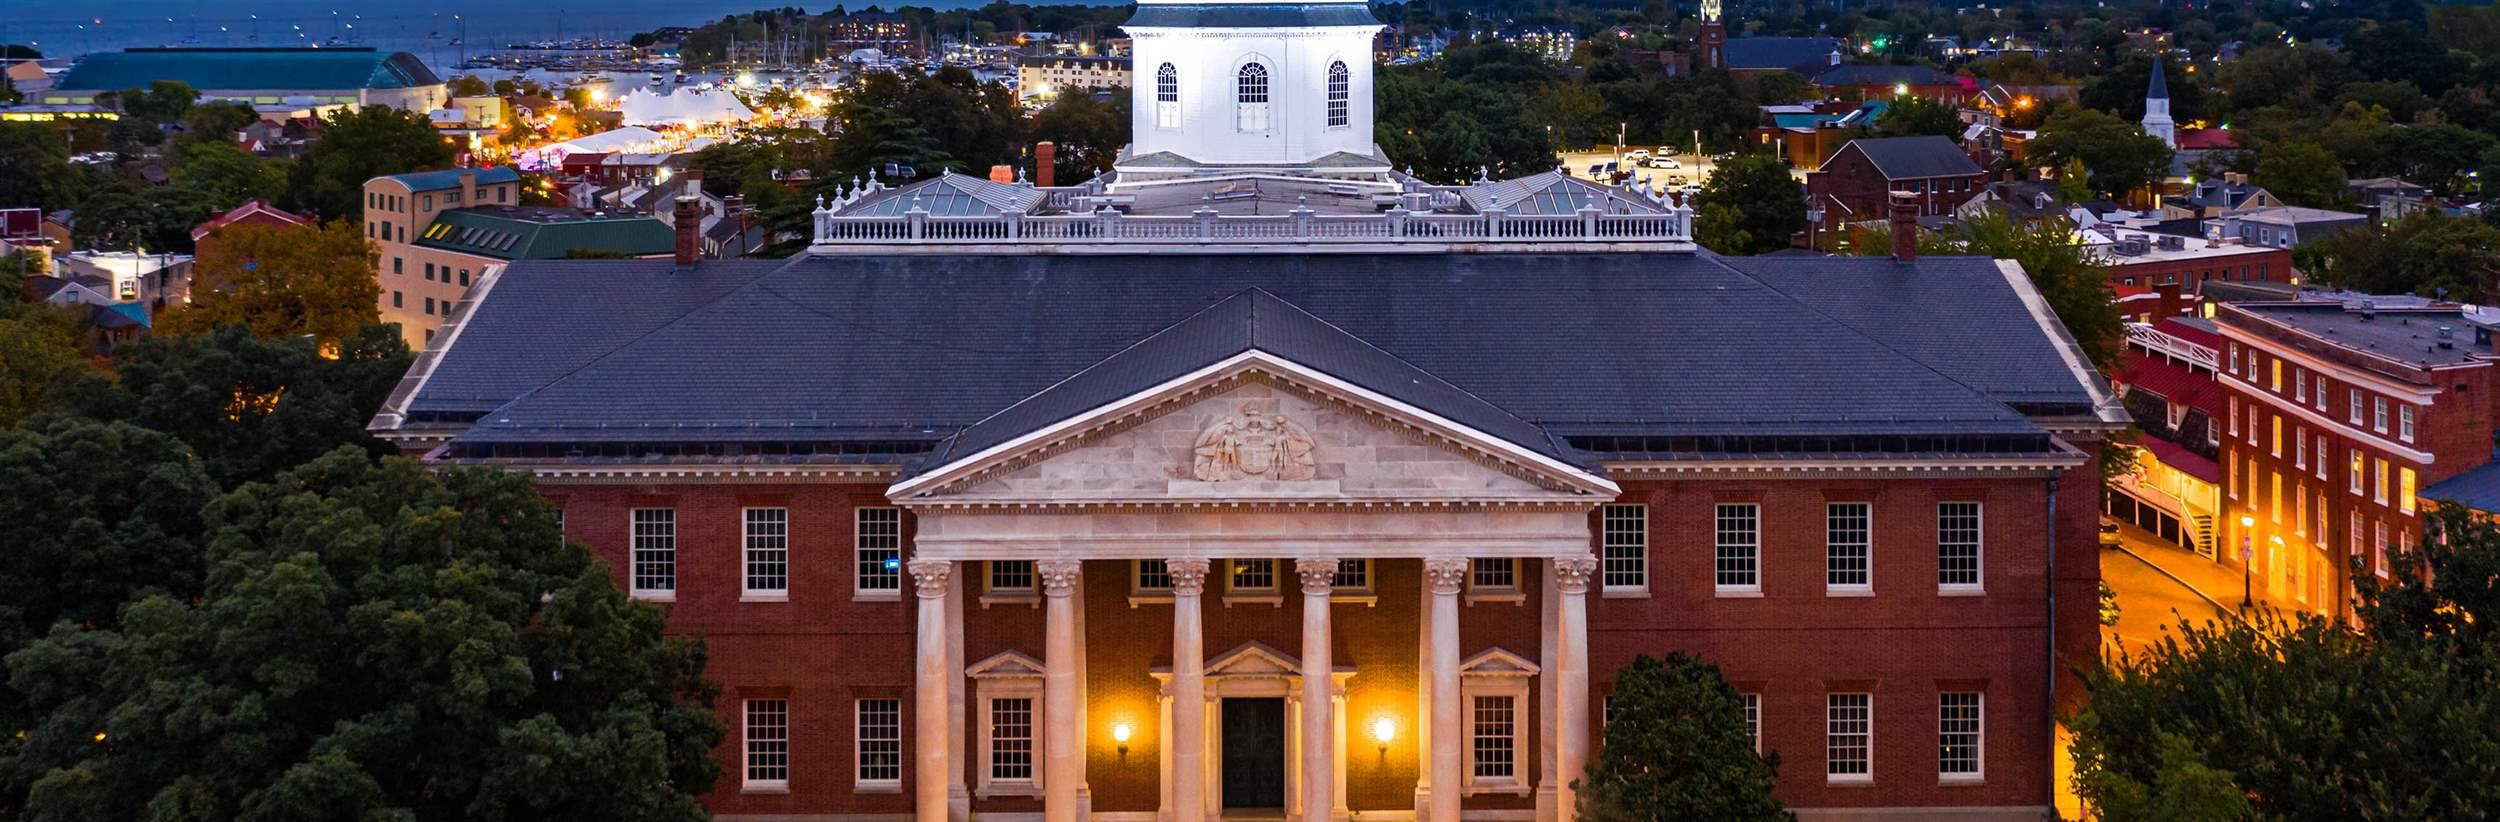 Maryland State House, in Annapolis, at dusk. The Maryland State House is the oldest U.S. state capitol in continuous legislative use, dating to 1772 and housing the Maryland General Assembly.